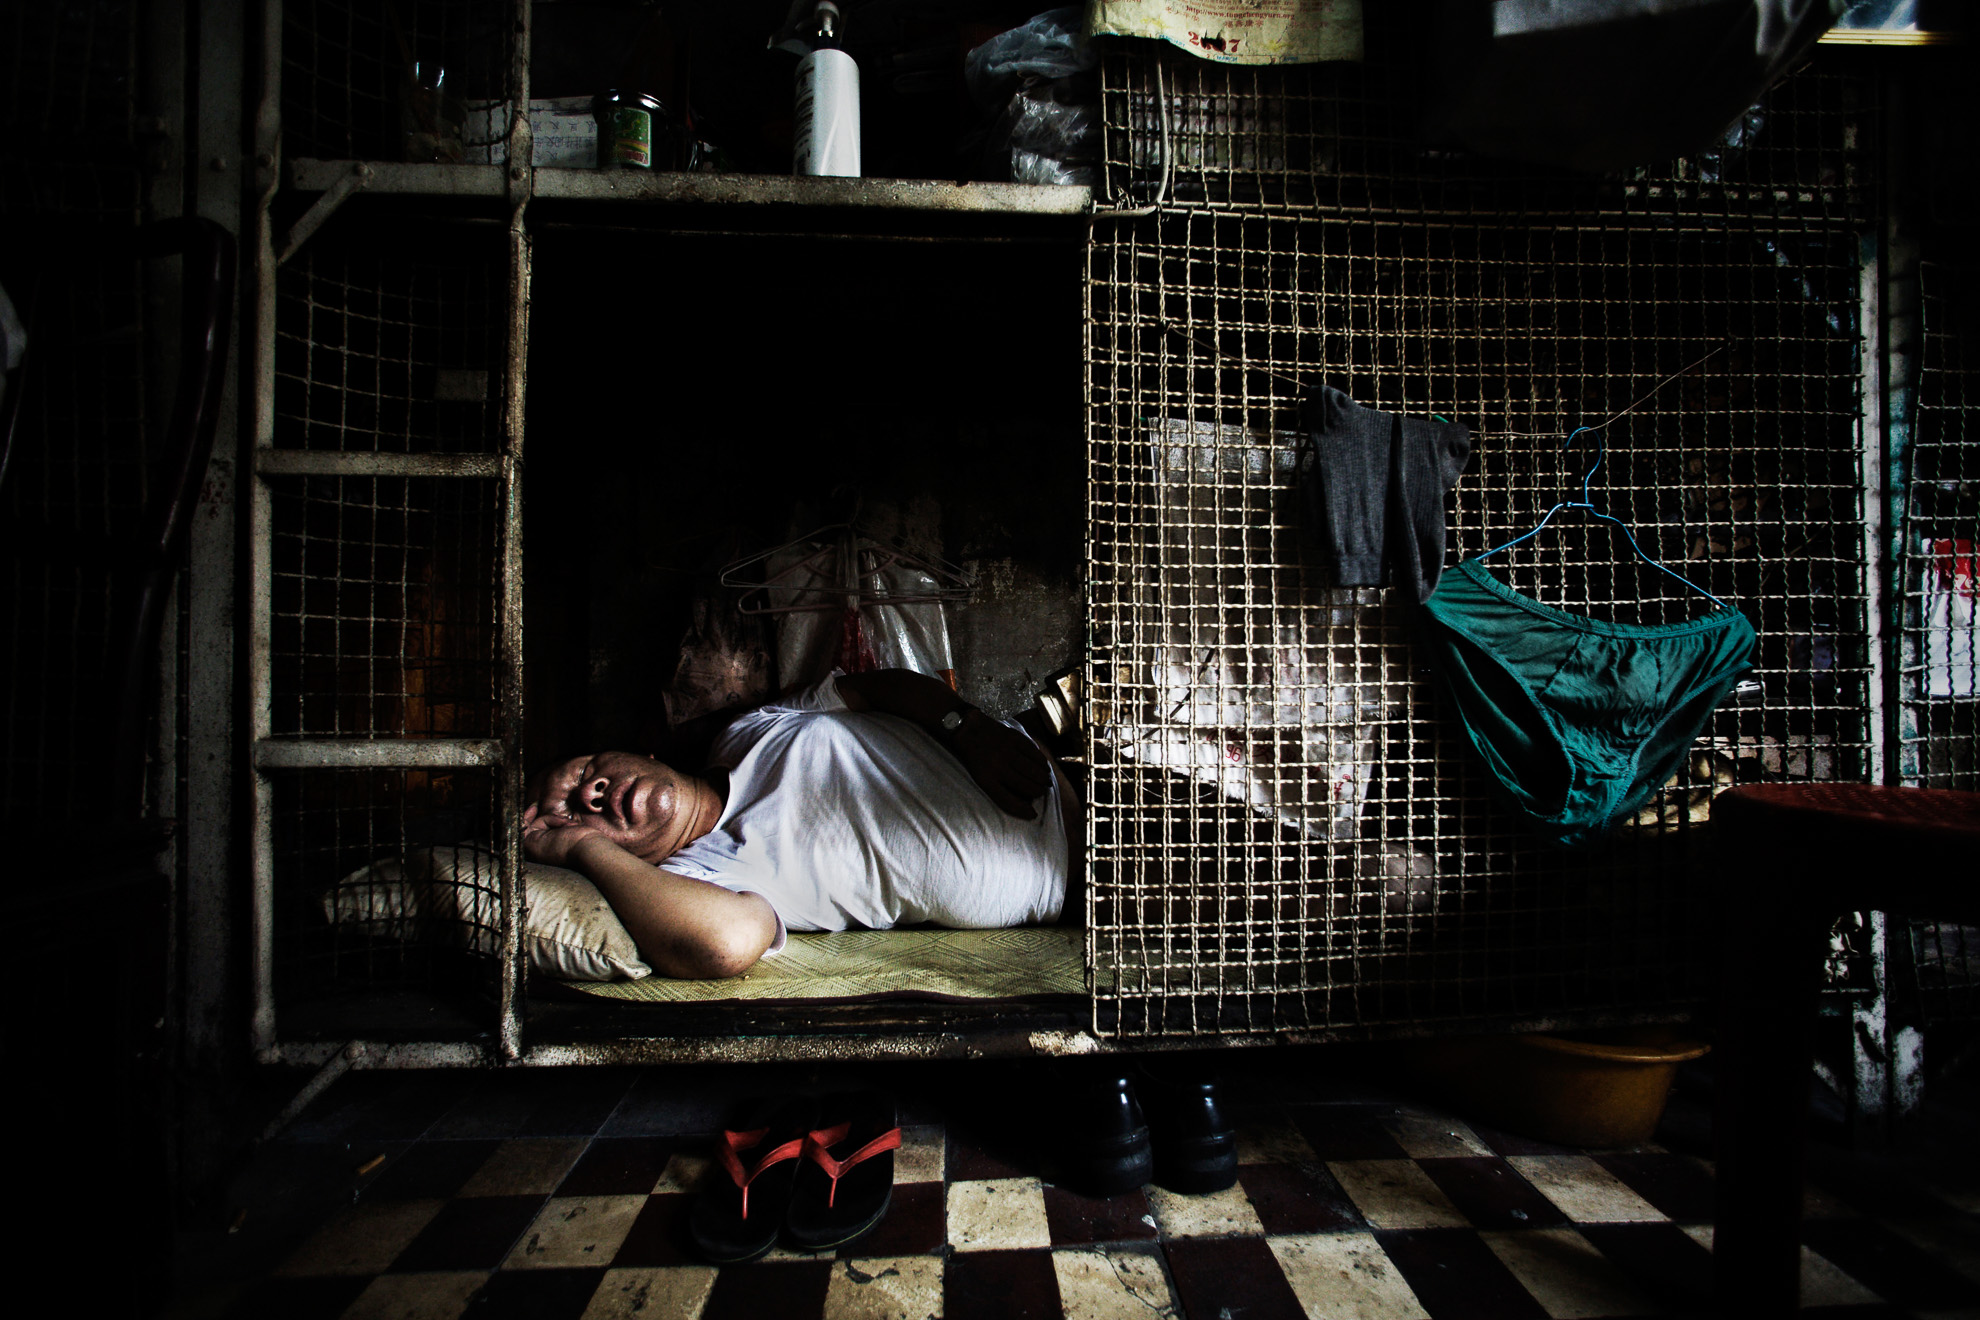 Yan Chi-keung sleeps in his small cage at the Hong Kong's Tai Kok Tsui district, July 16, 2008. In older districts such as Tai Kok Tsui, hundreds of elderly men still reside in caged cubicles in cramped, old tenement flats which house up to 12 individuals in often squalid conditions.